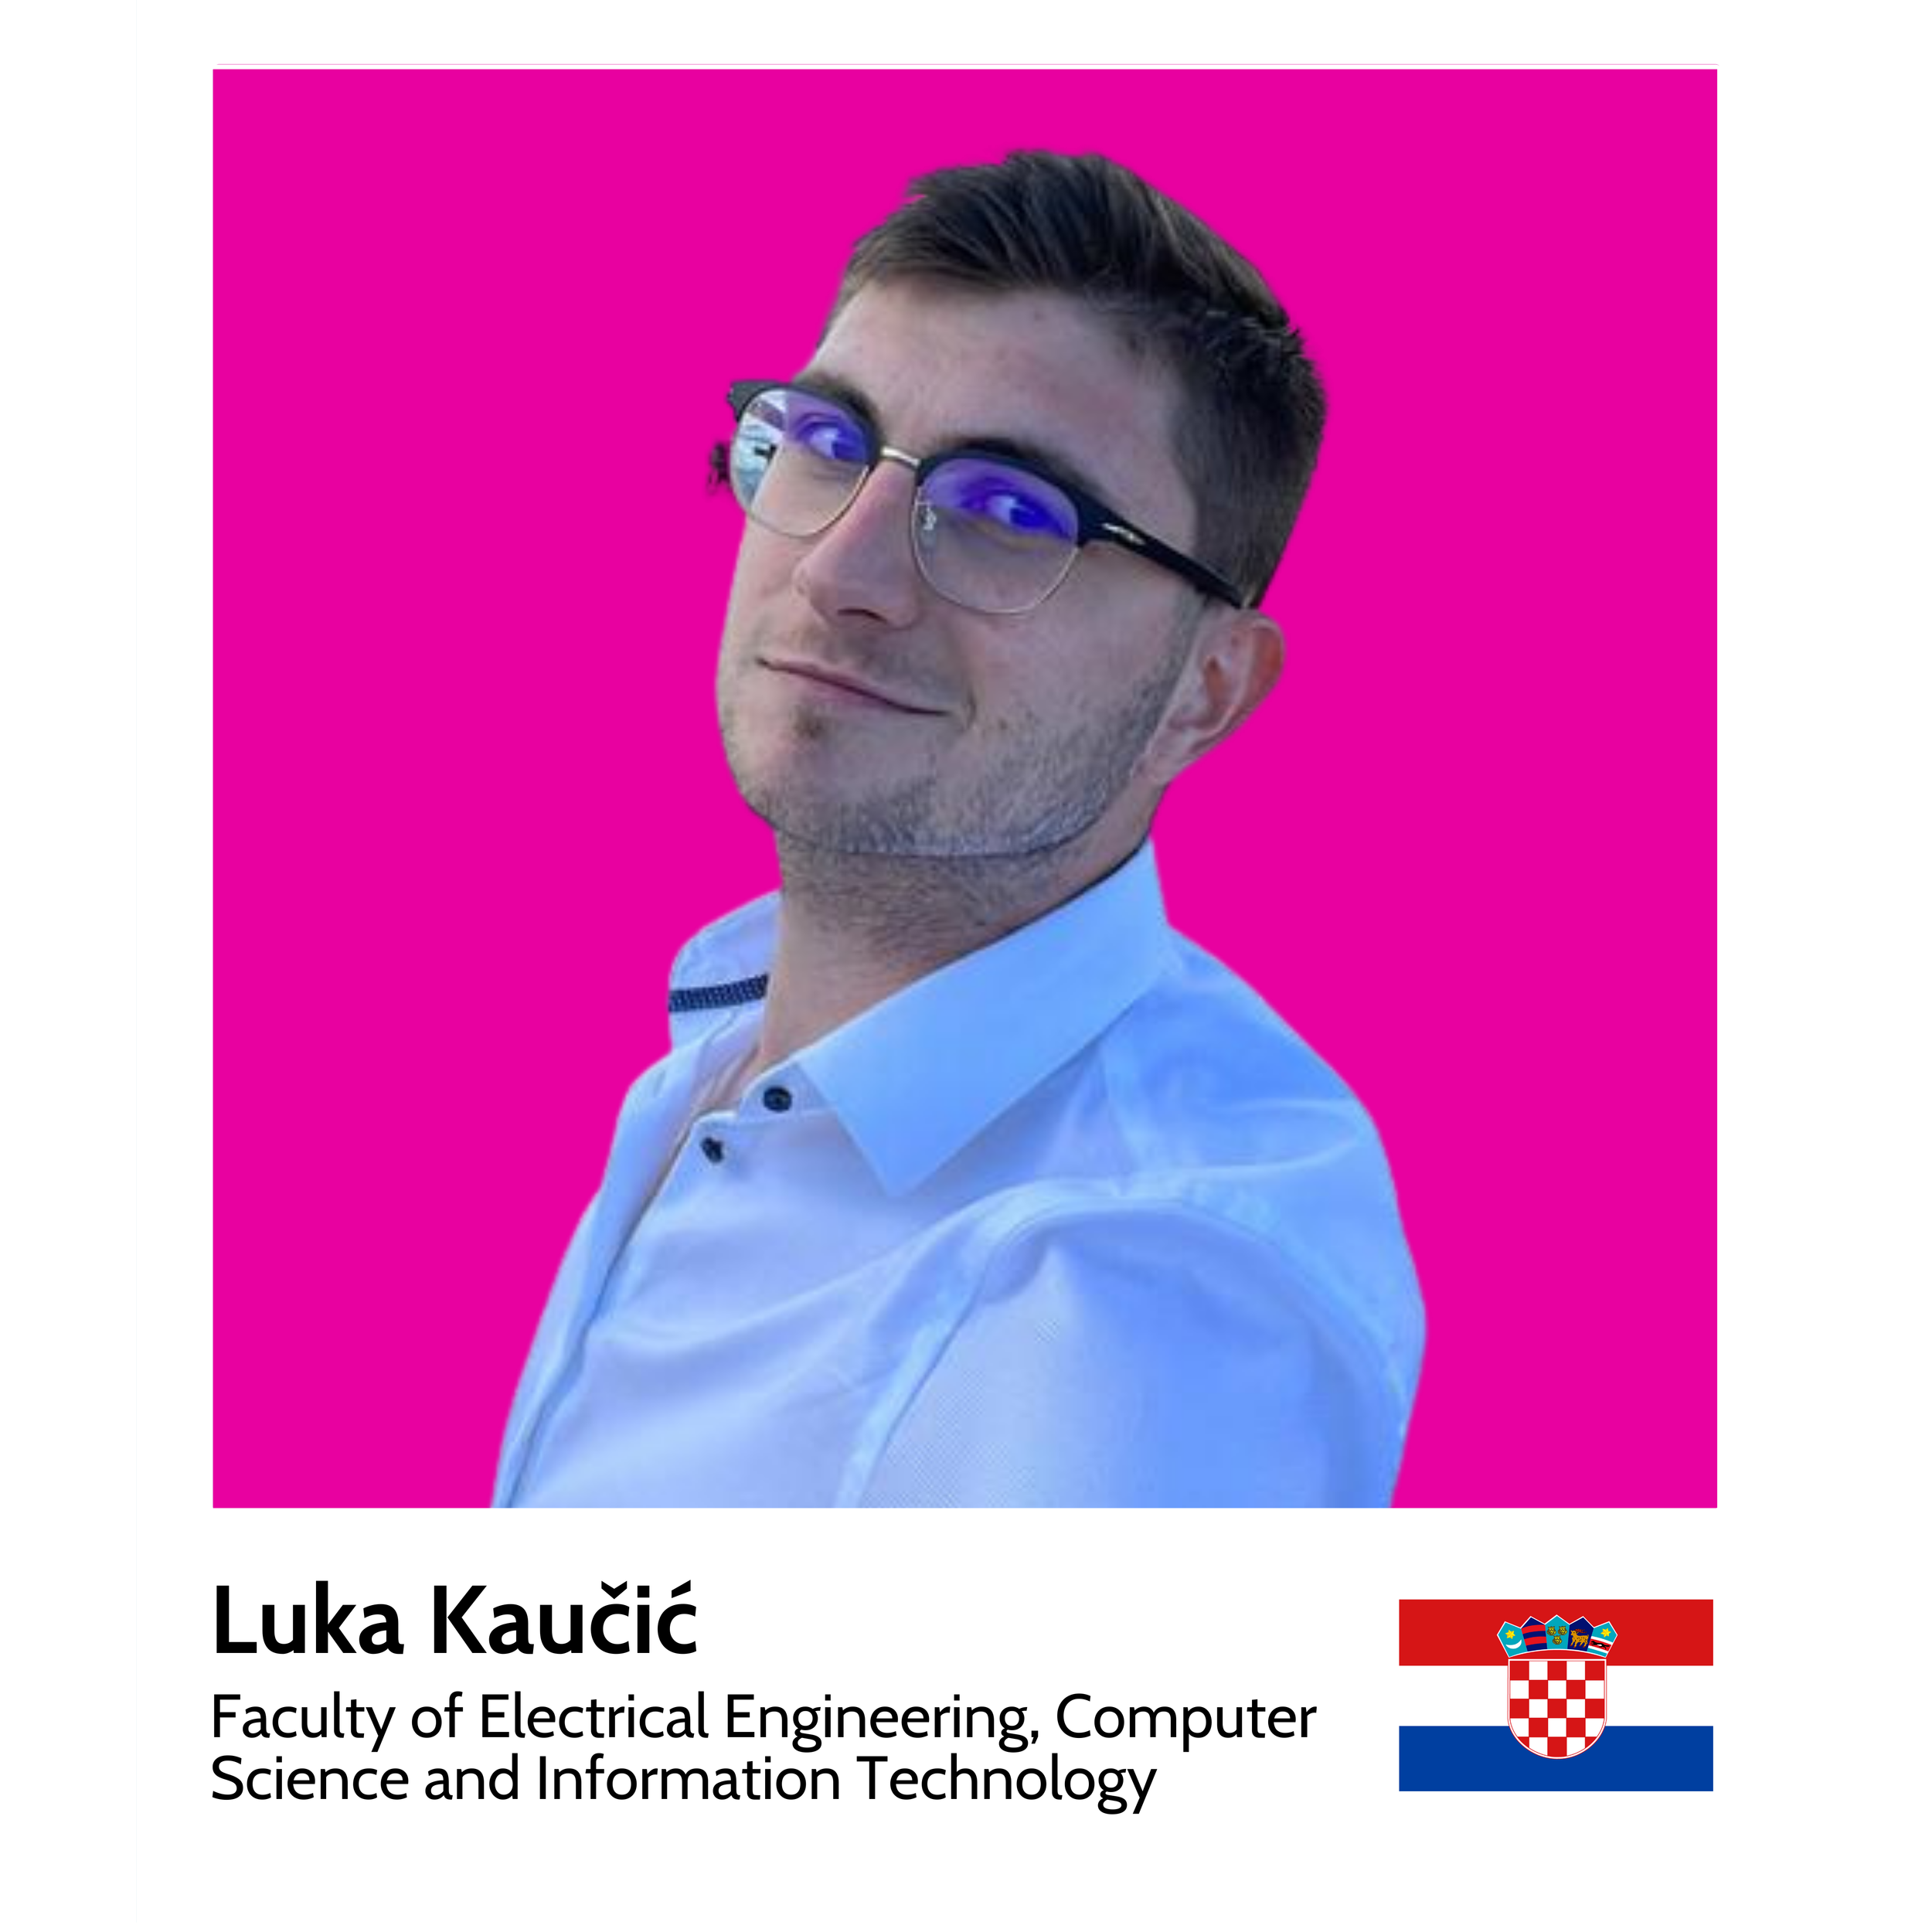 Your_Big_Year_ibm_zsystems_ambassador_ Luka_Kaučić_Faculty_of_Electrical_Engineering,_Computer_Science_and_Information_Technology_(FERIT)_Osijek.png